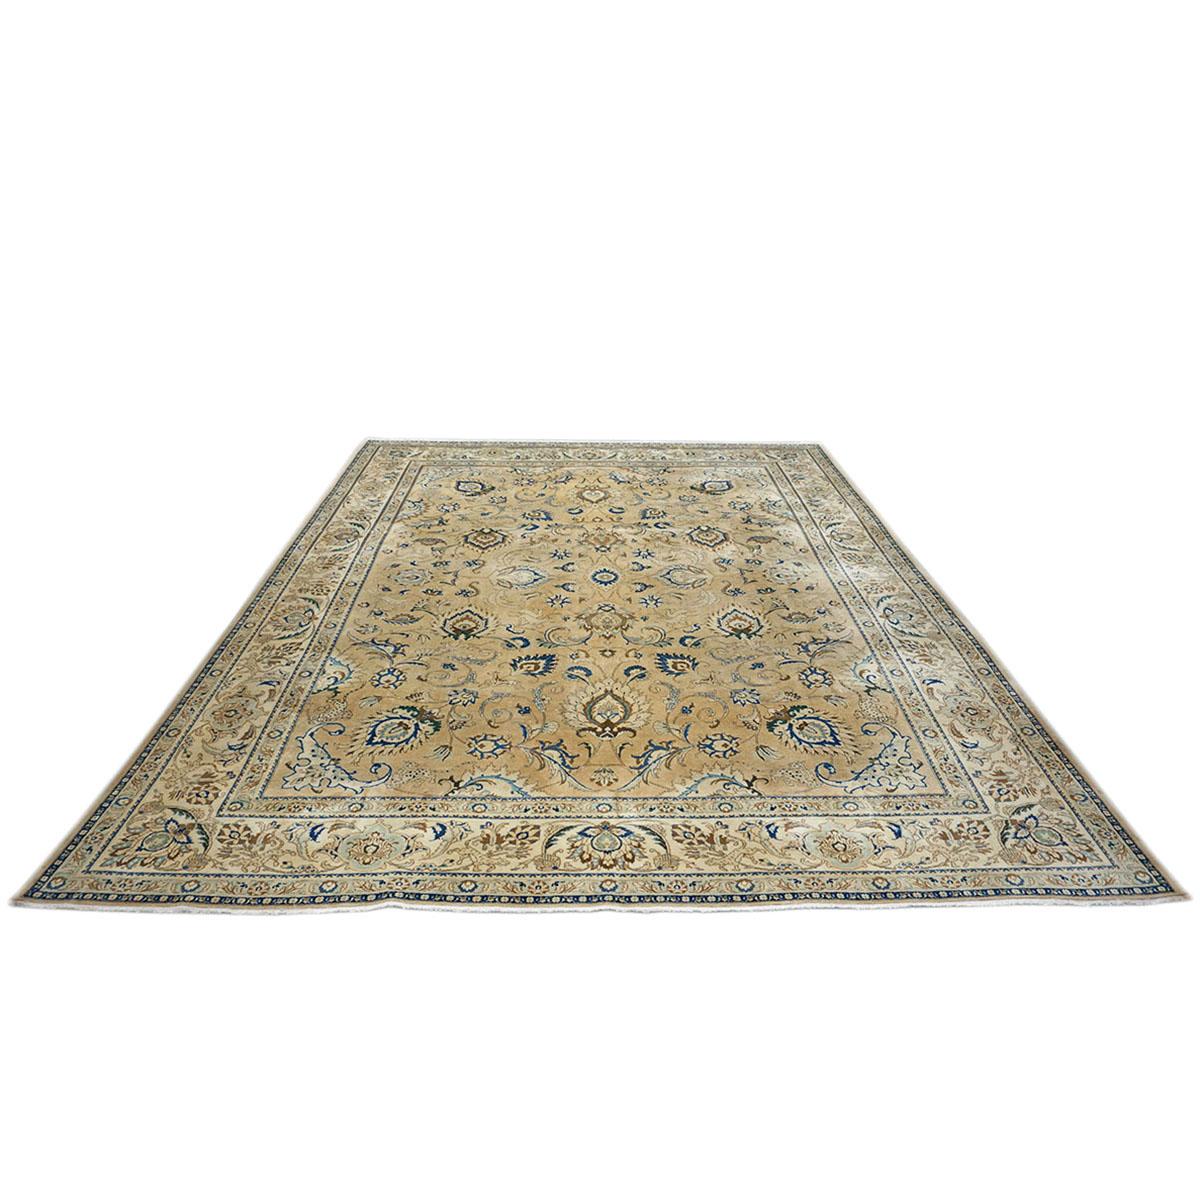 Hand-Woven 20th Century Antique Persian Tabriz 10x12 Tan, Ivory, & Blue Handmade Area Rug For Sale